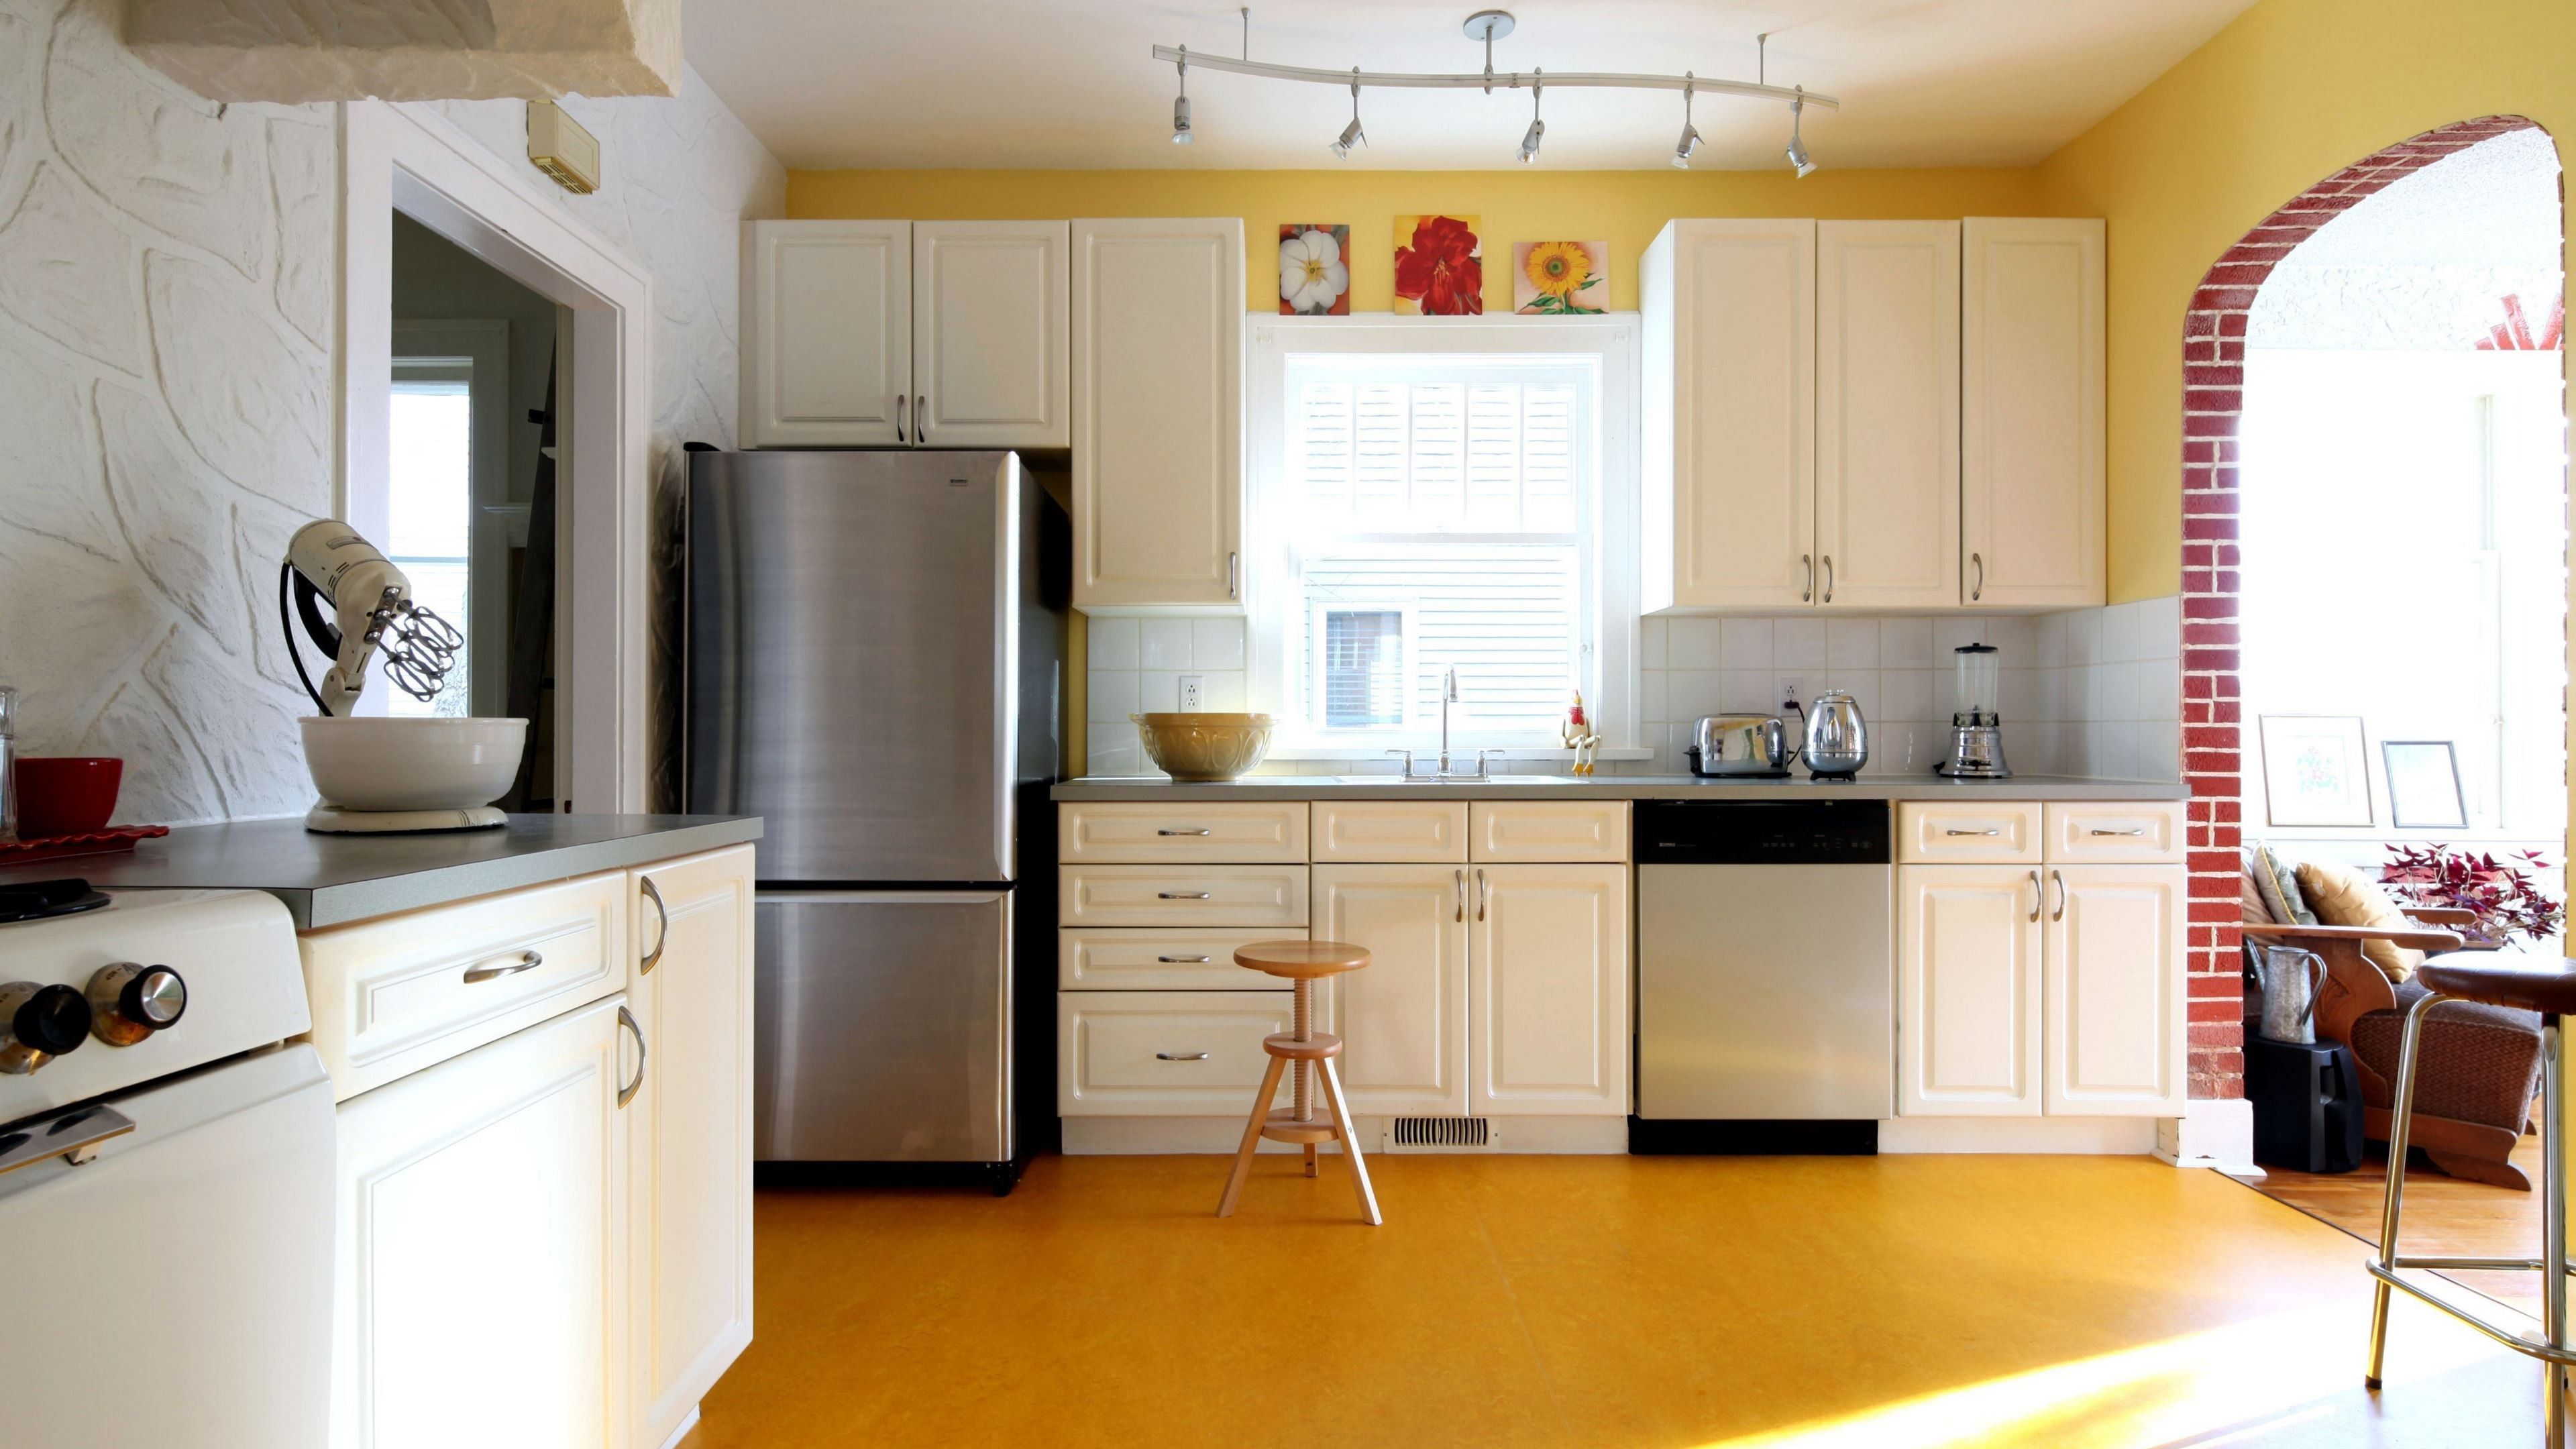 yellow kitchen wallpaper,countertop,furniture,cabinetry,room,kitchen